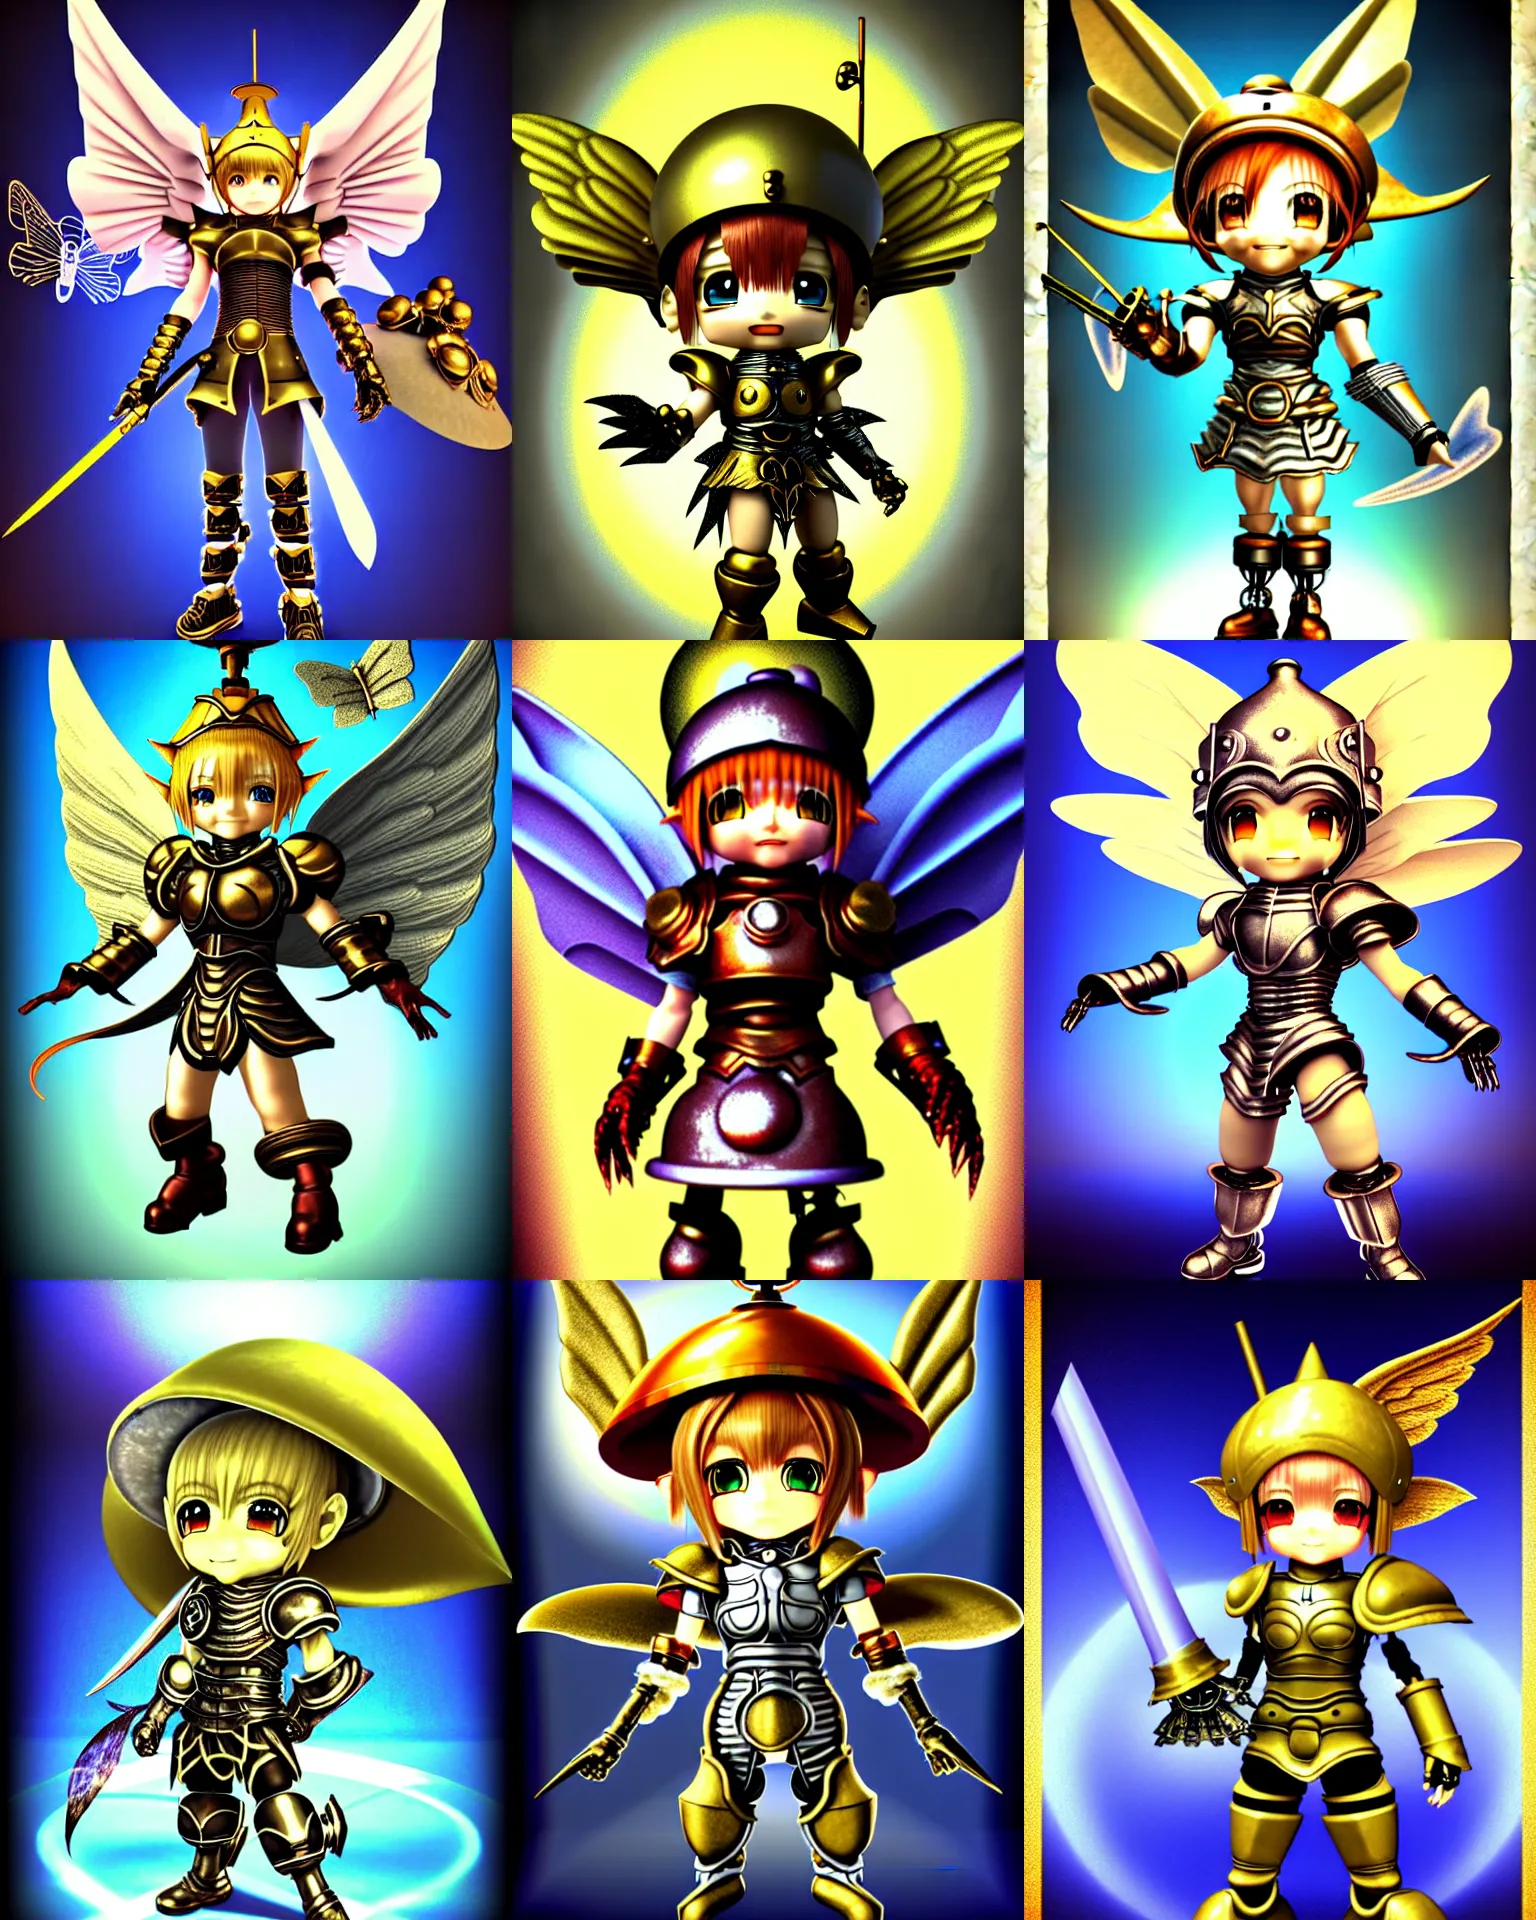 Prompt: vintage cgi 3 dimensional render poster of chibi cyborg knight in the style of micha klein final fantasy ix by ichiro tanida wearing a big bell hat and wearing angel wings against a psychedelic swirly background with 3 d butterflies and 3 d flowers n the style of 1 9 9 0's cgi renders 3 d rendered by micha klein lightwave